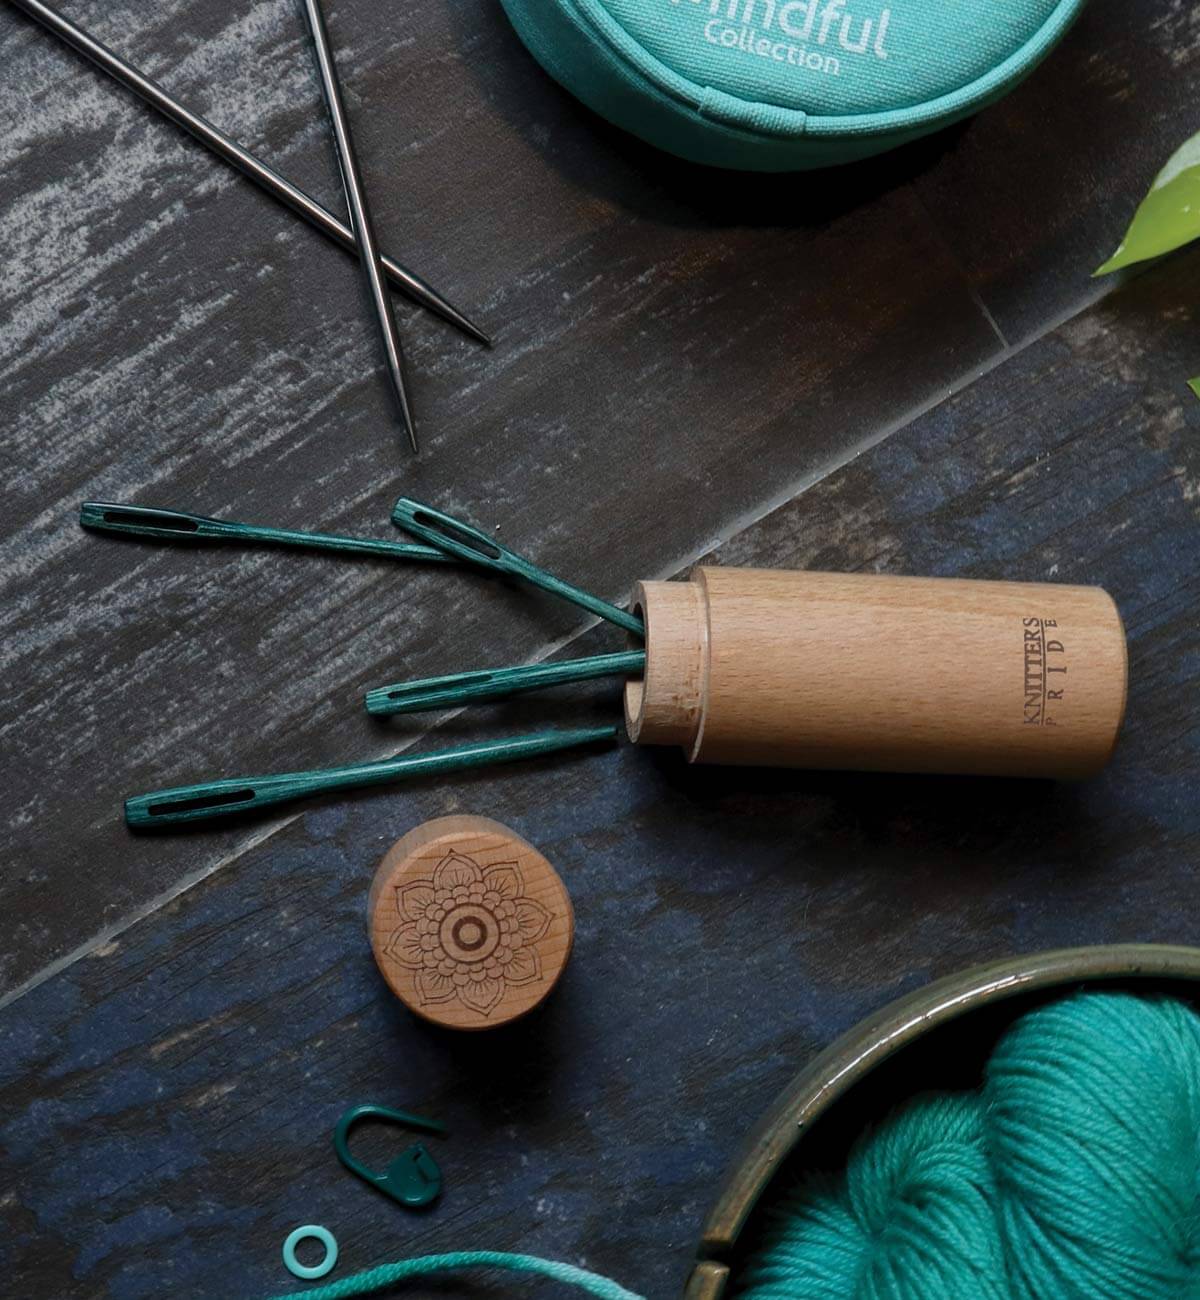 Mindful Collection - Teal Wooden Darning Needles